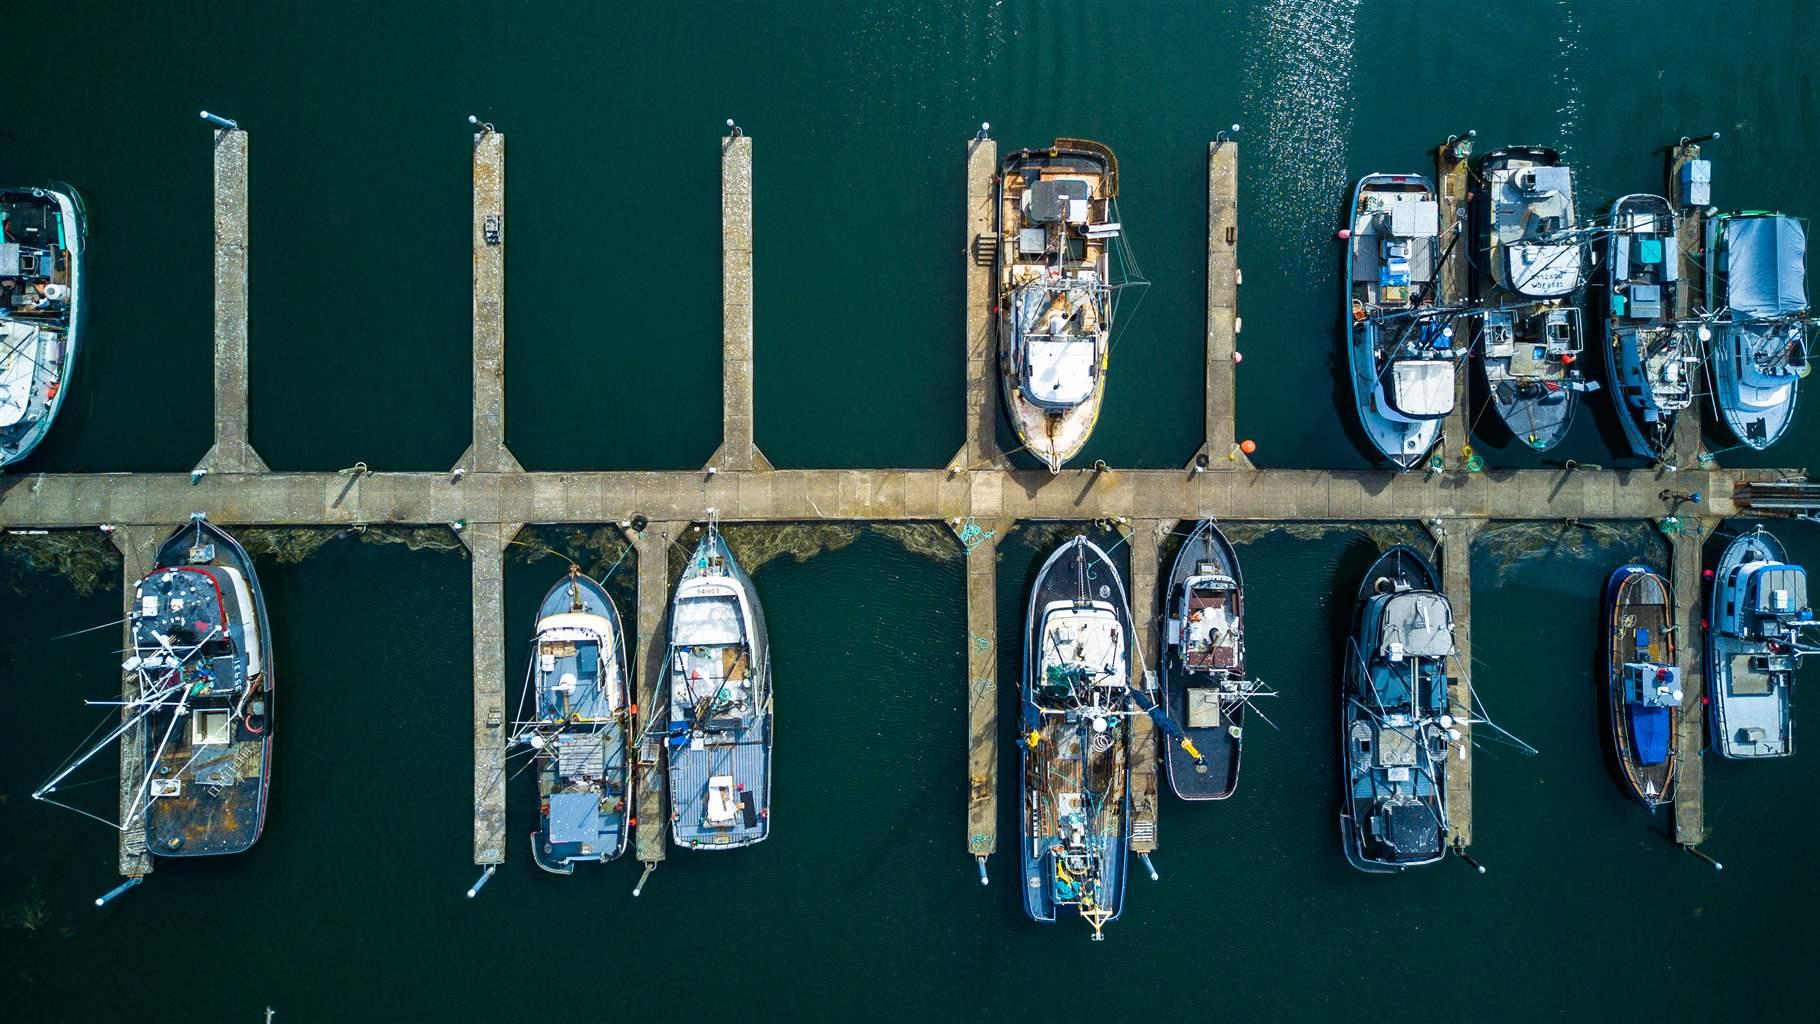  Fourteen blue and white fishing vessels are docked in blue green water, divided by tan walkways between them. 